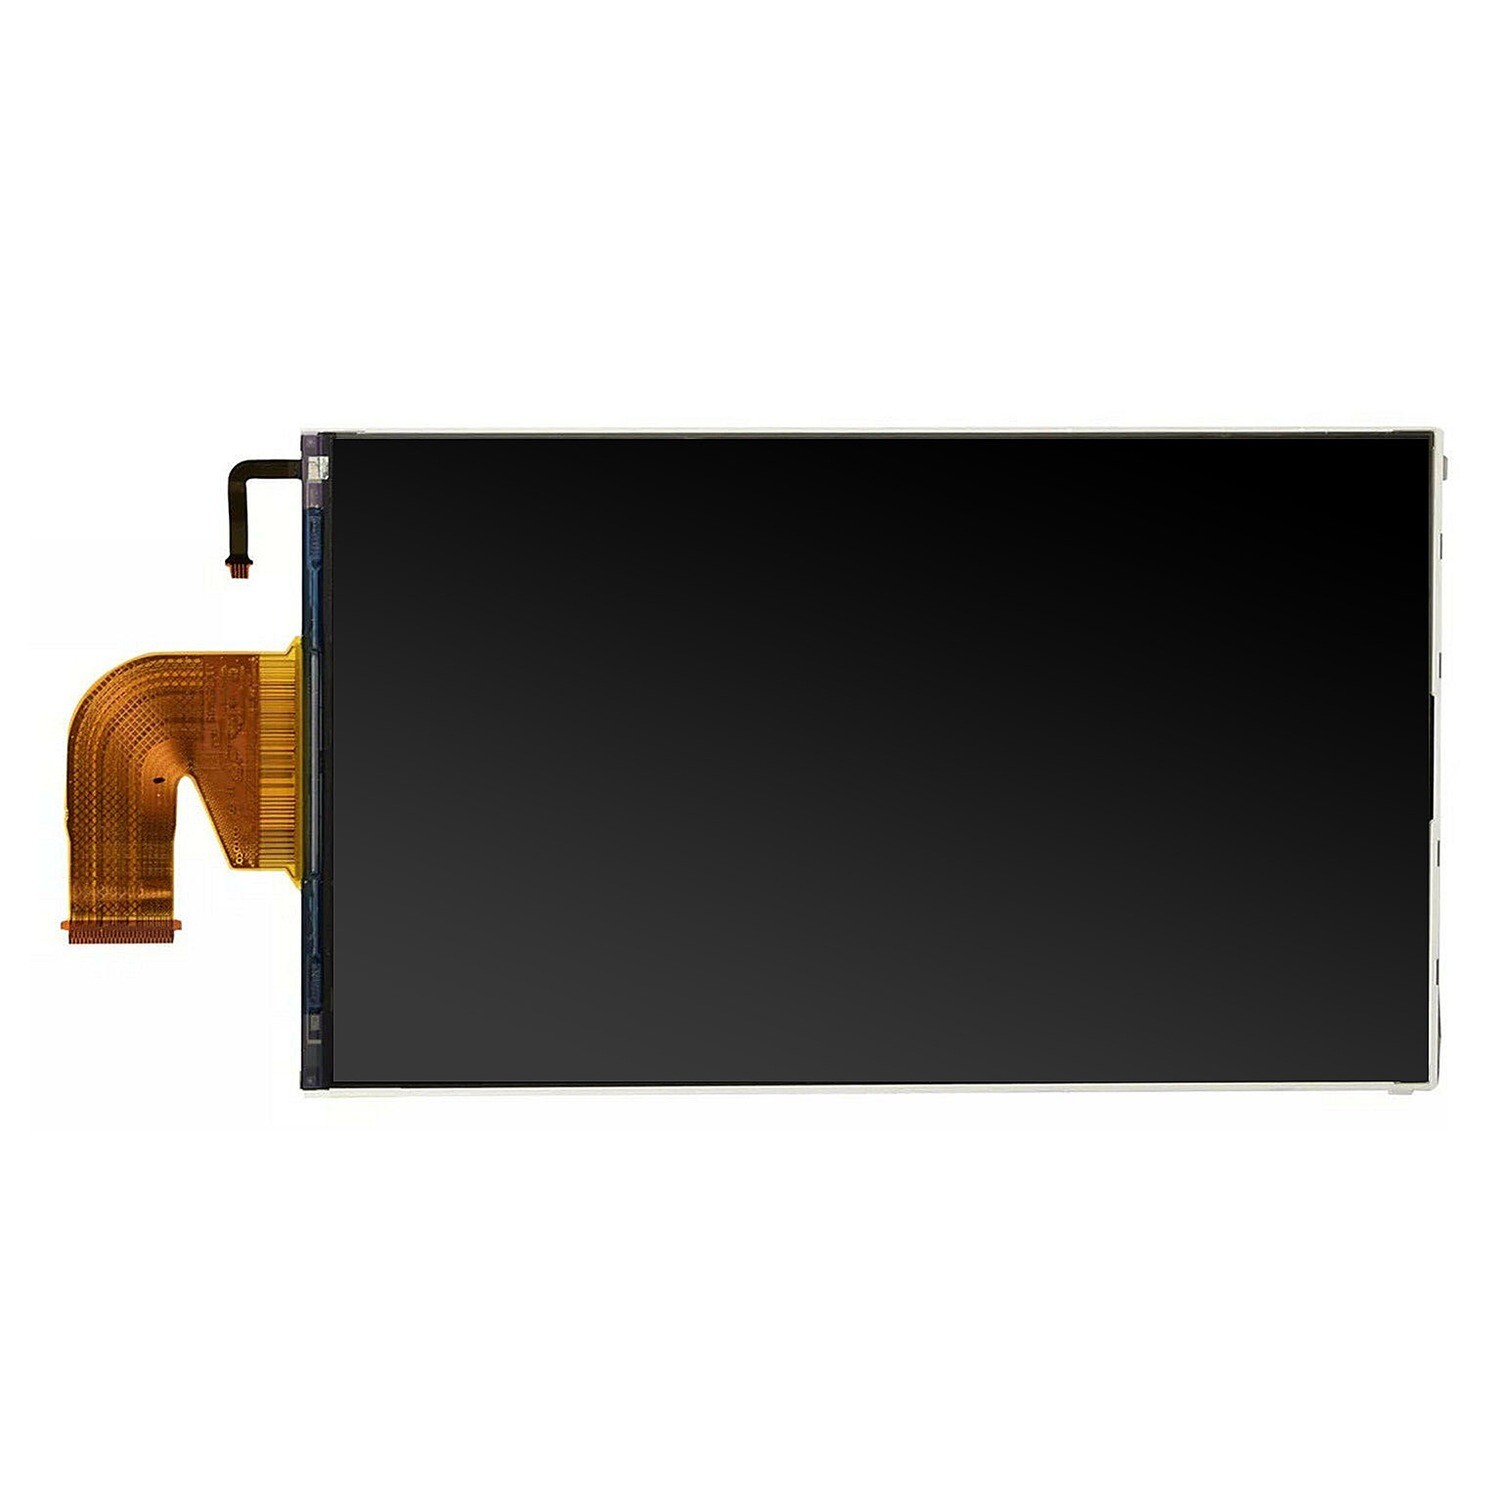 Switch LCD Panel